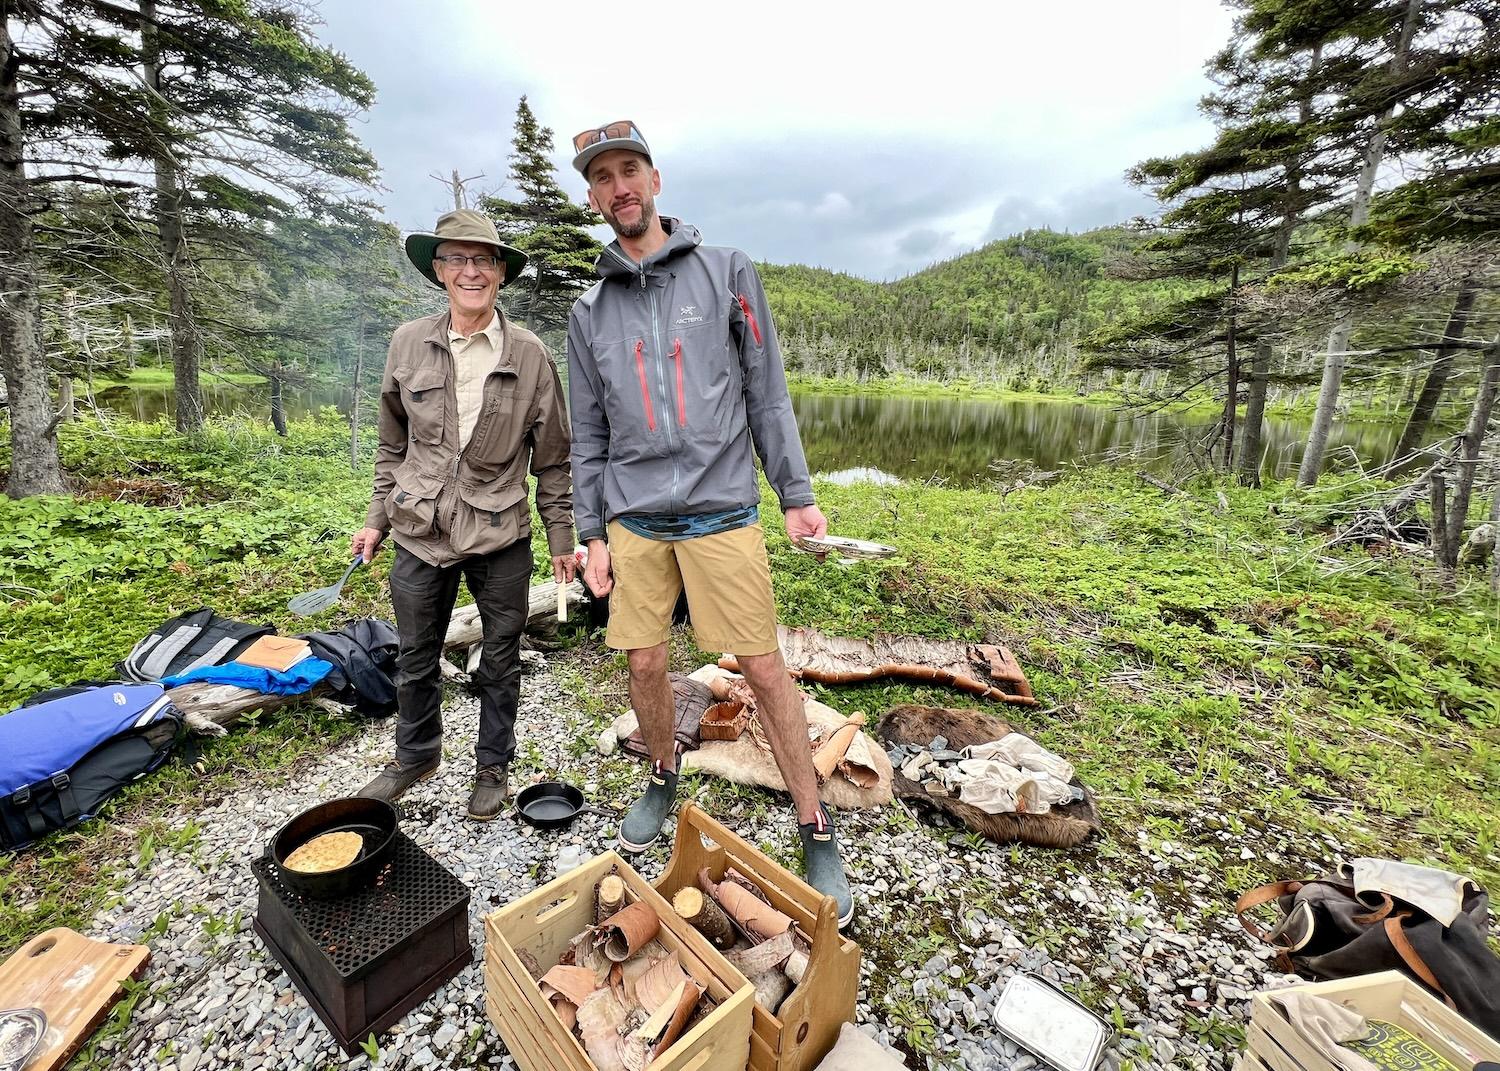 Robbie Hickey, right, co-owns Gros Morne Adventures with his wife Kristen, whose father Keith Payne, left, is the guide for its Indigenous experiences.